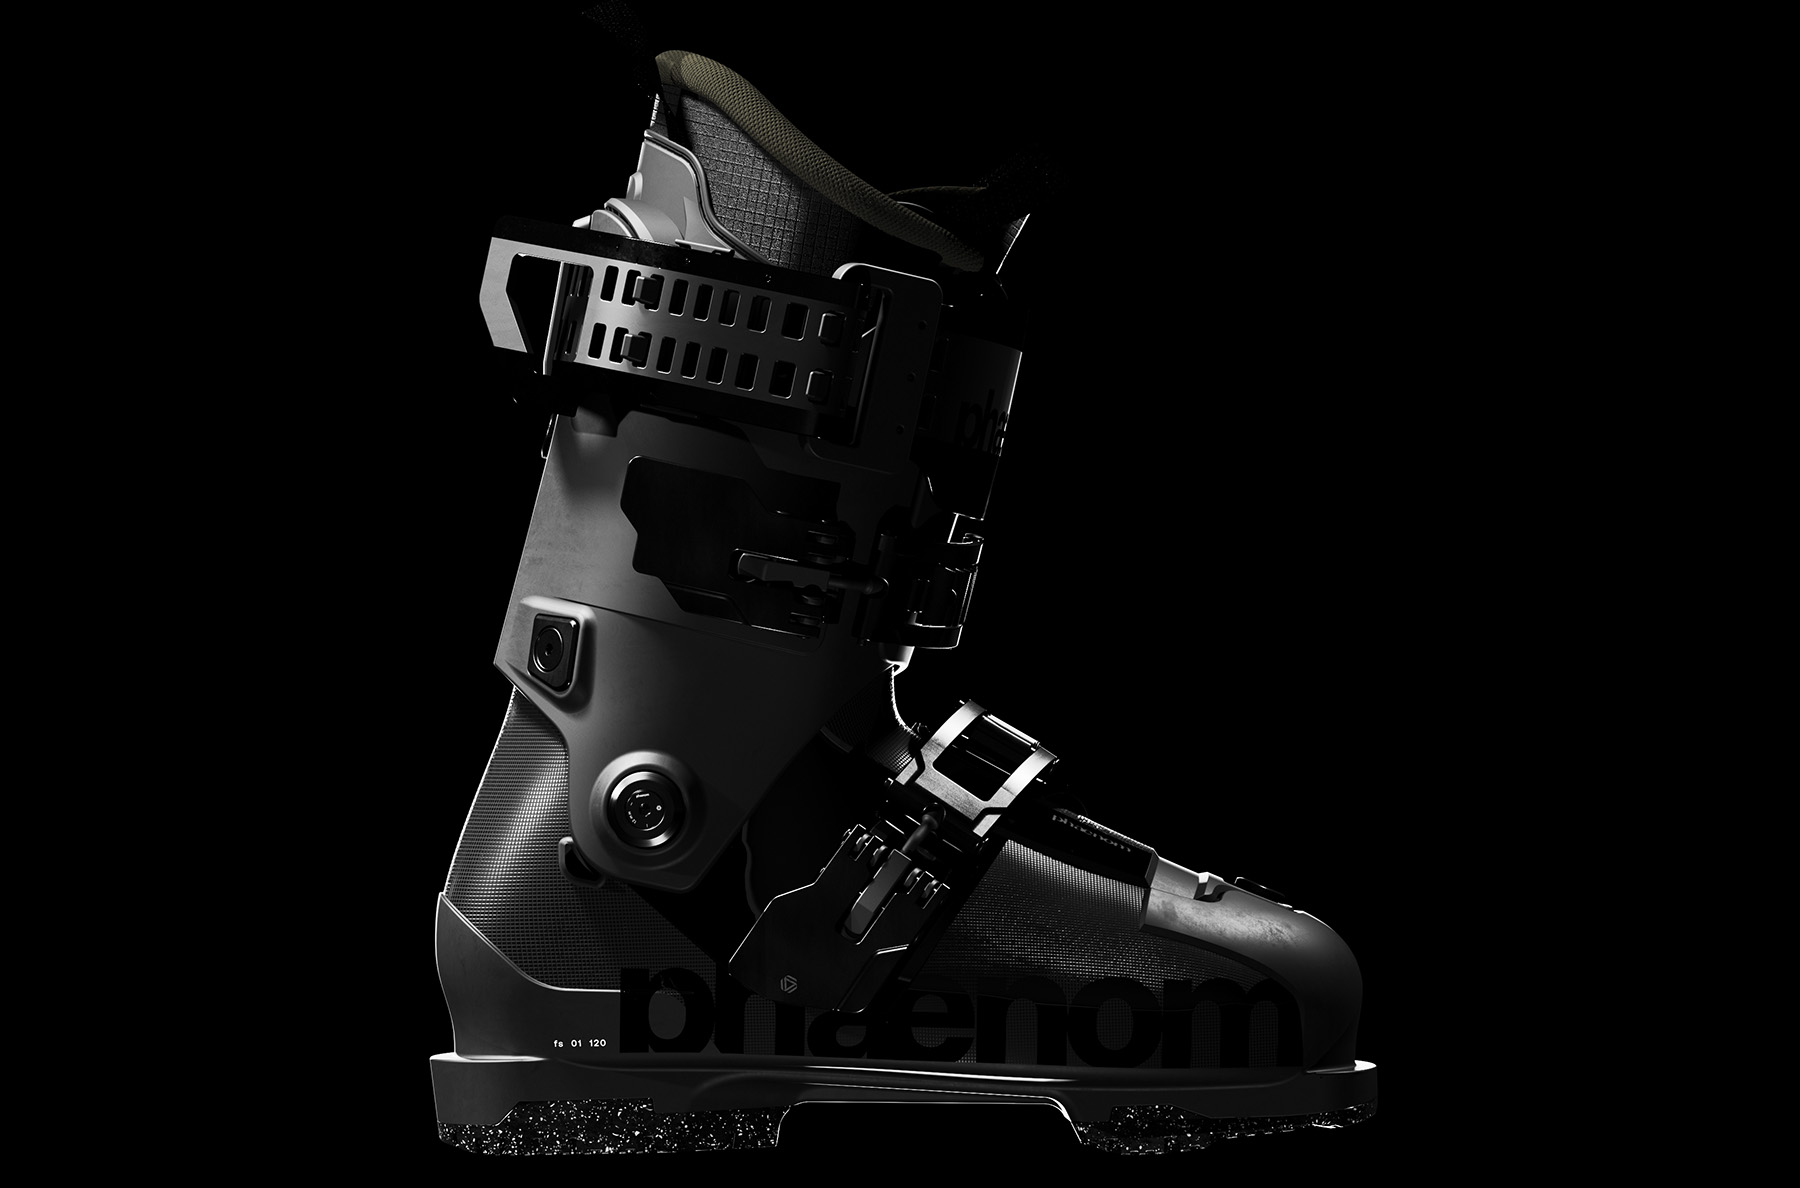 phaenom footwear launches ski boot collection | BLISTER discusses the details